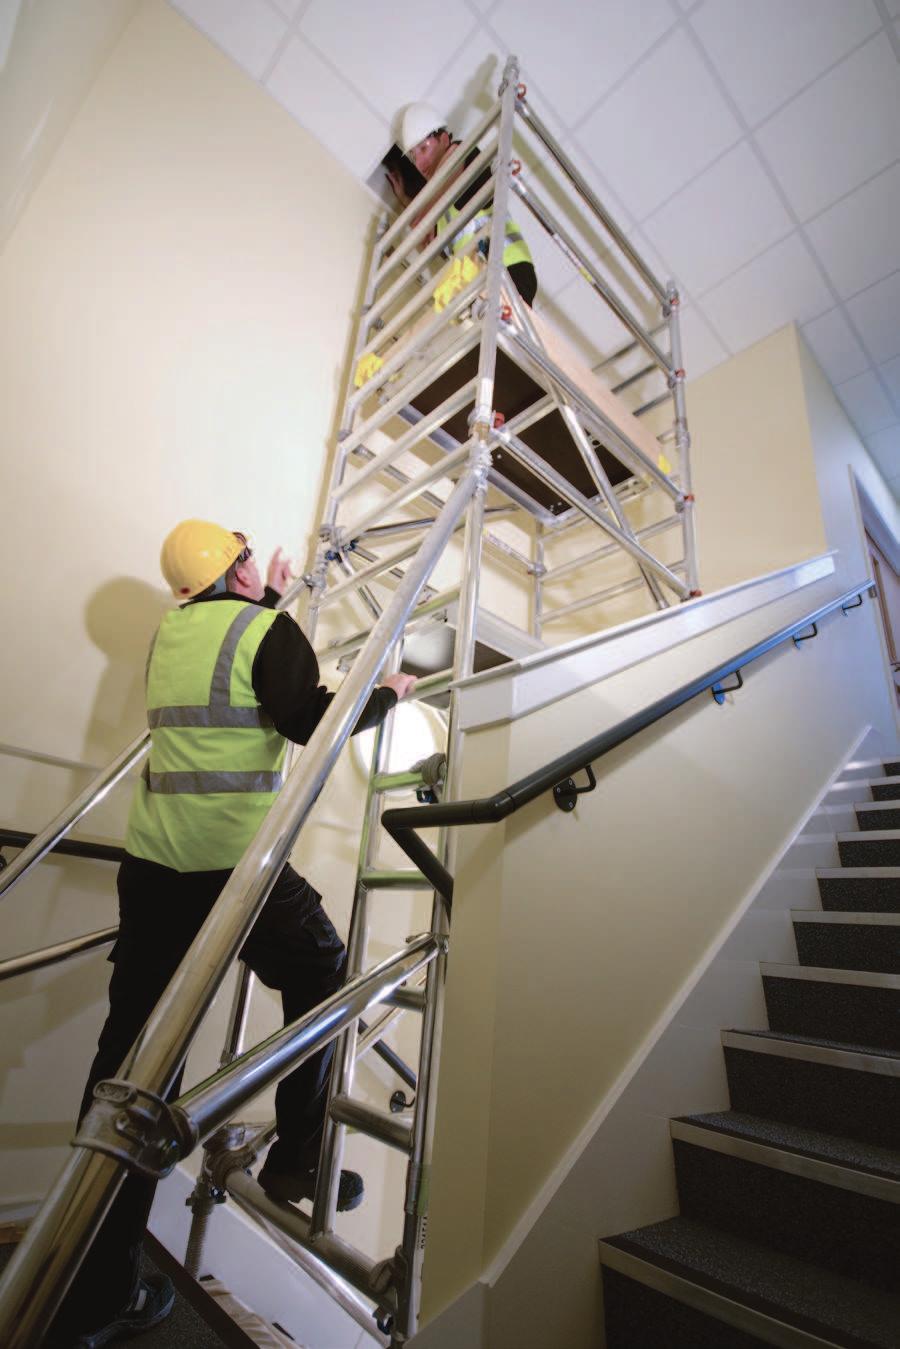 Boss Stairmax The safest portable access solution for domestic & commercial staircases» Available in 3